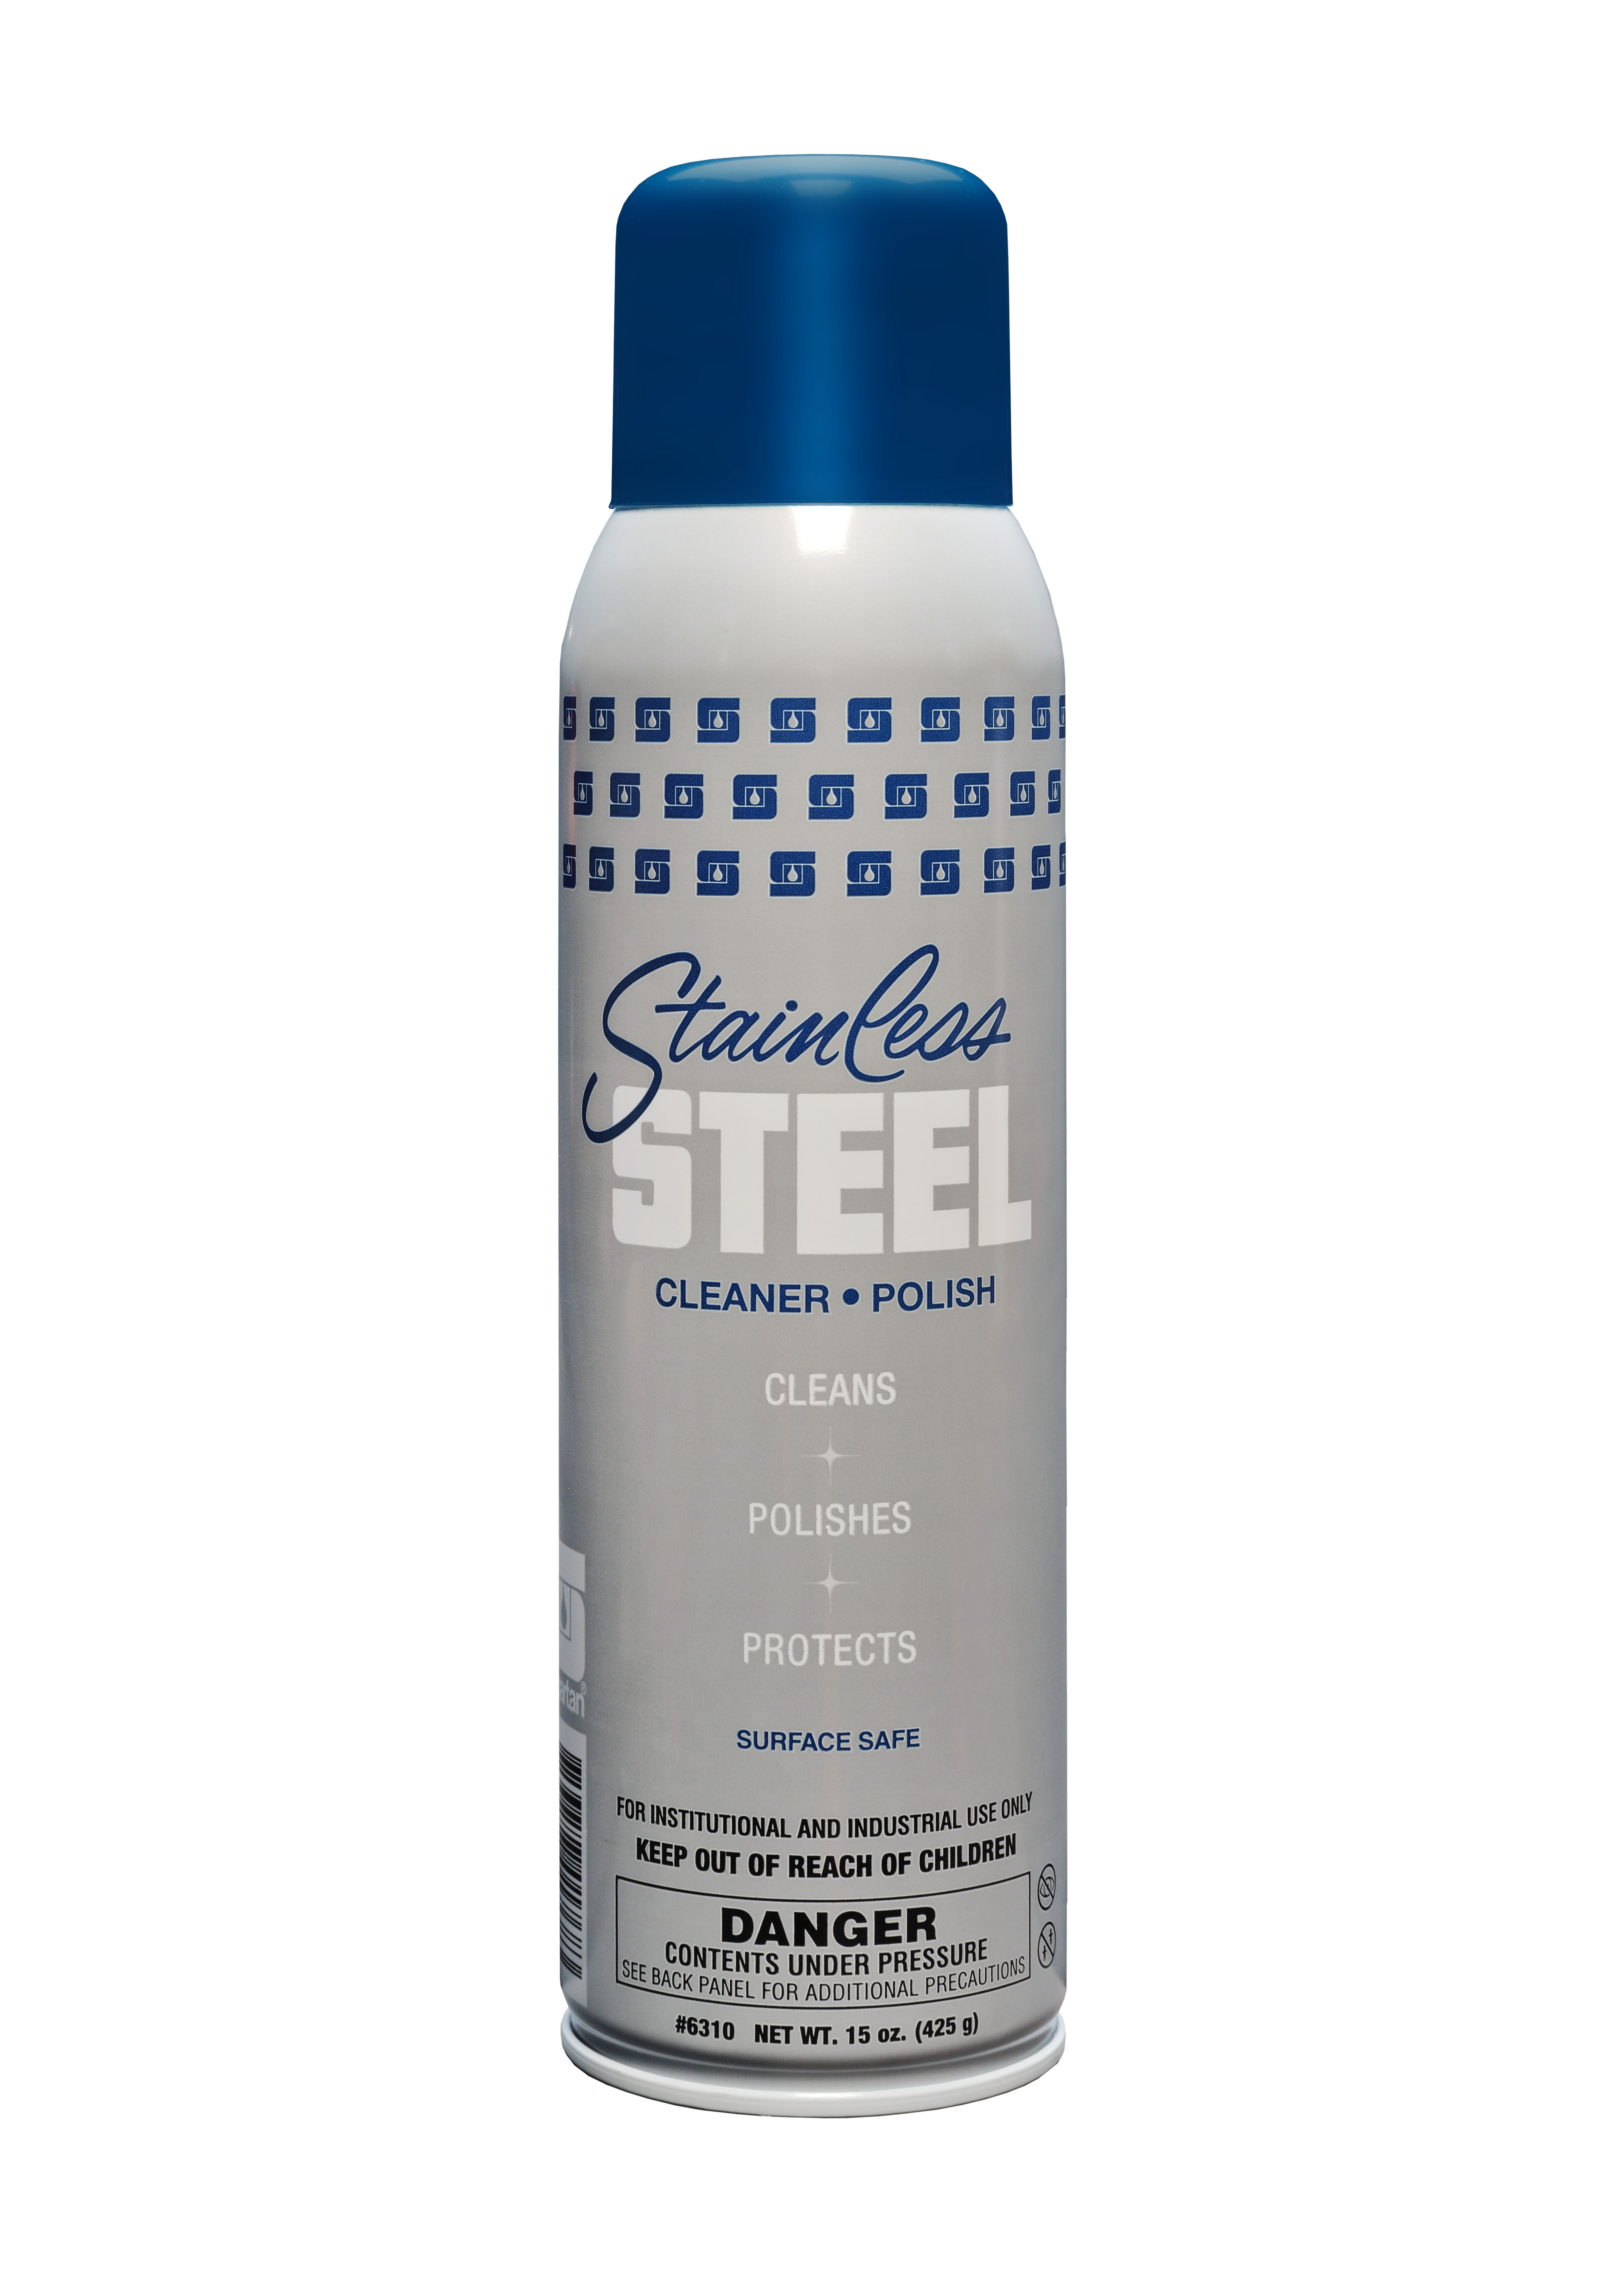 Spartan Chemical Company Stainless Steel Cleaner - Polish, 12-20 OZ.CAN